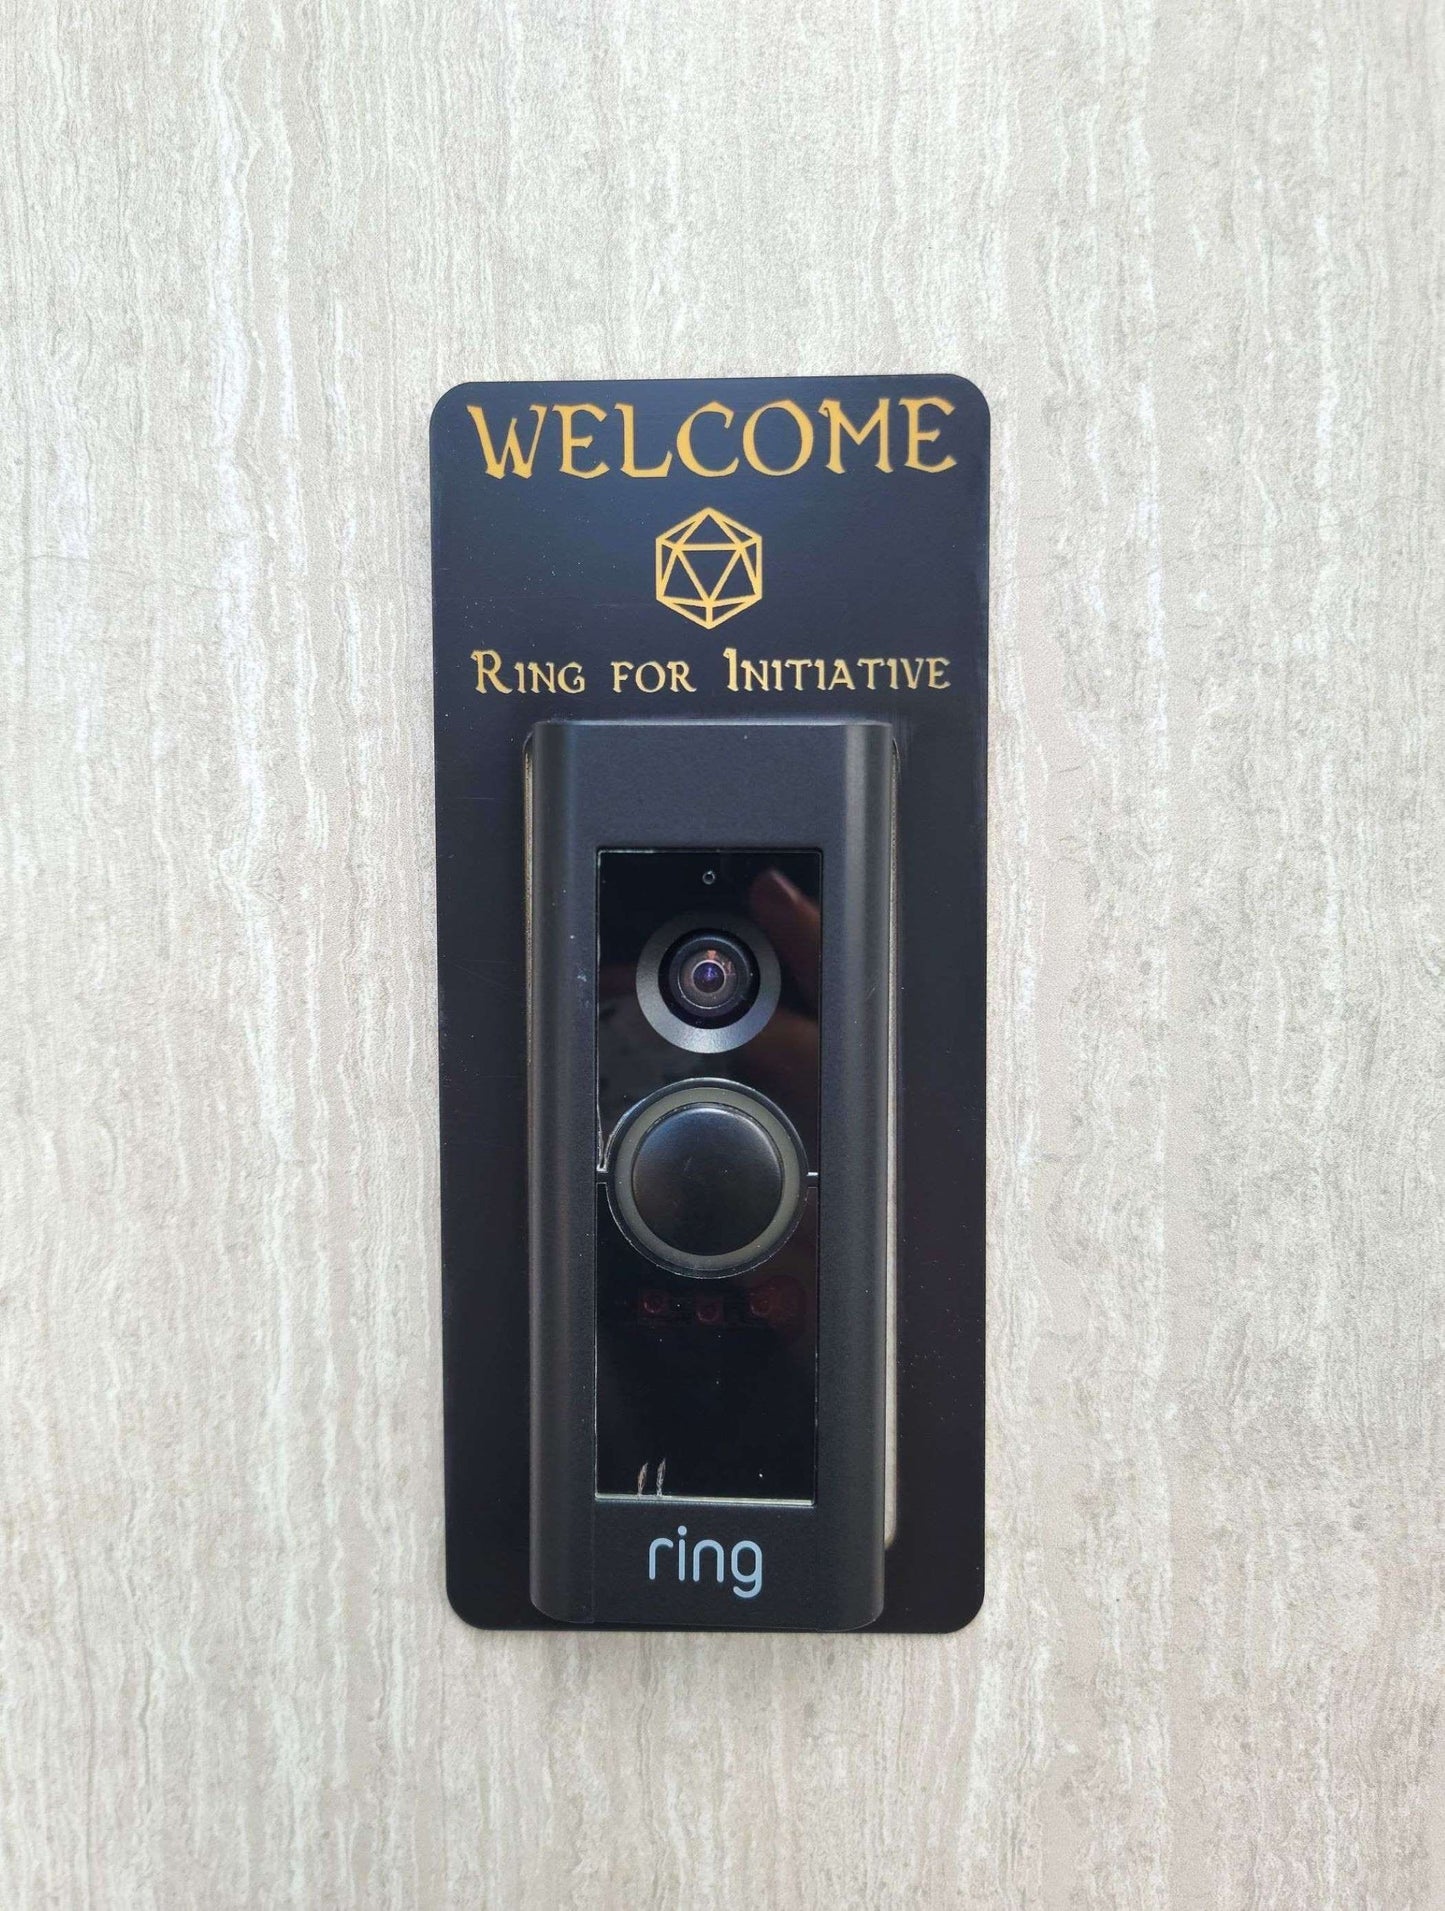 Black laminate doorbell surround with golden 20 sided dice and lettering stating Welcome Ring for Initiative around Ring doorbell on gray background